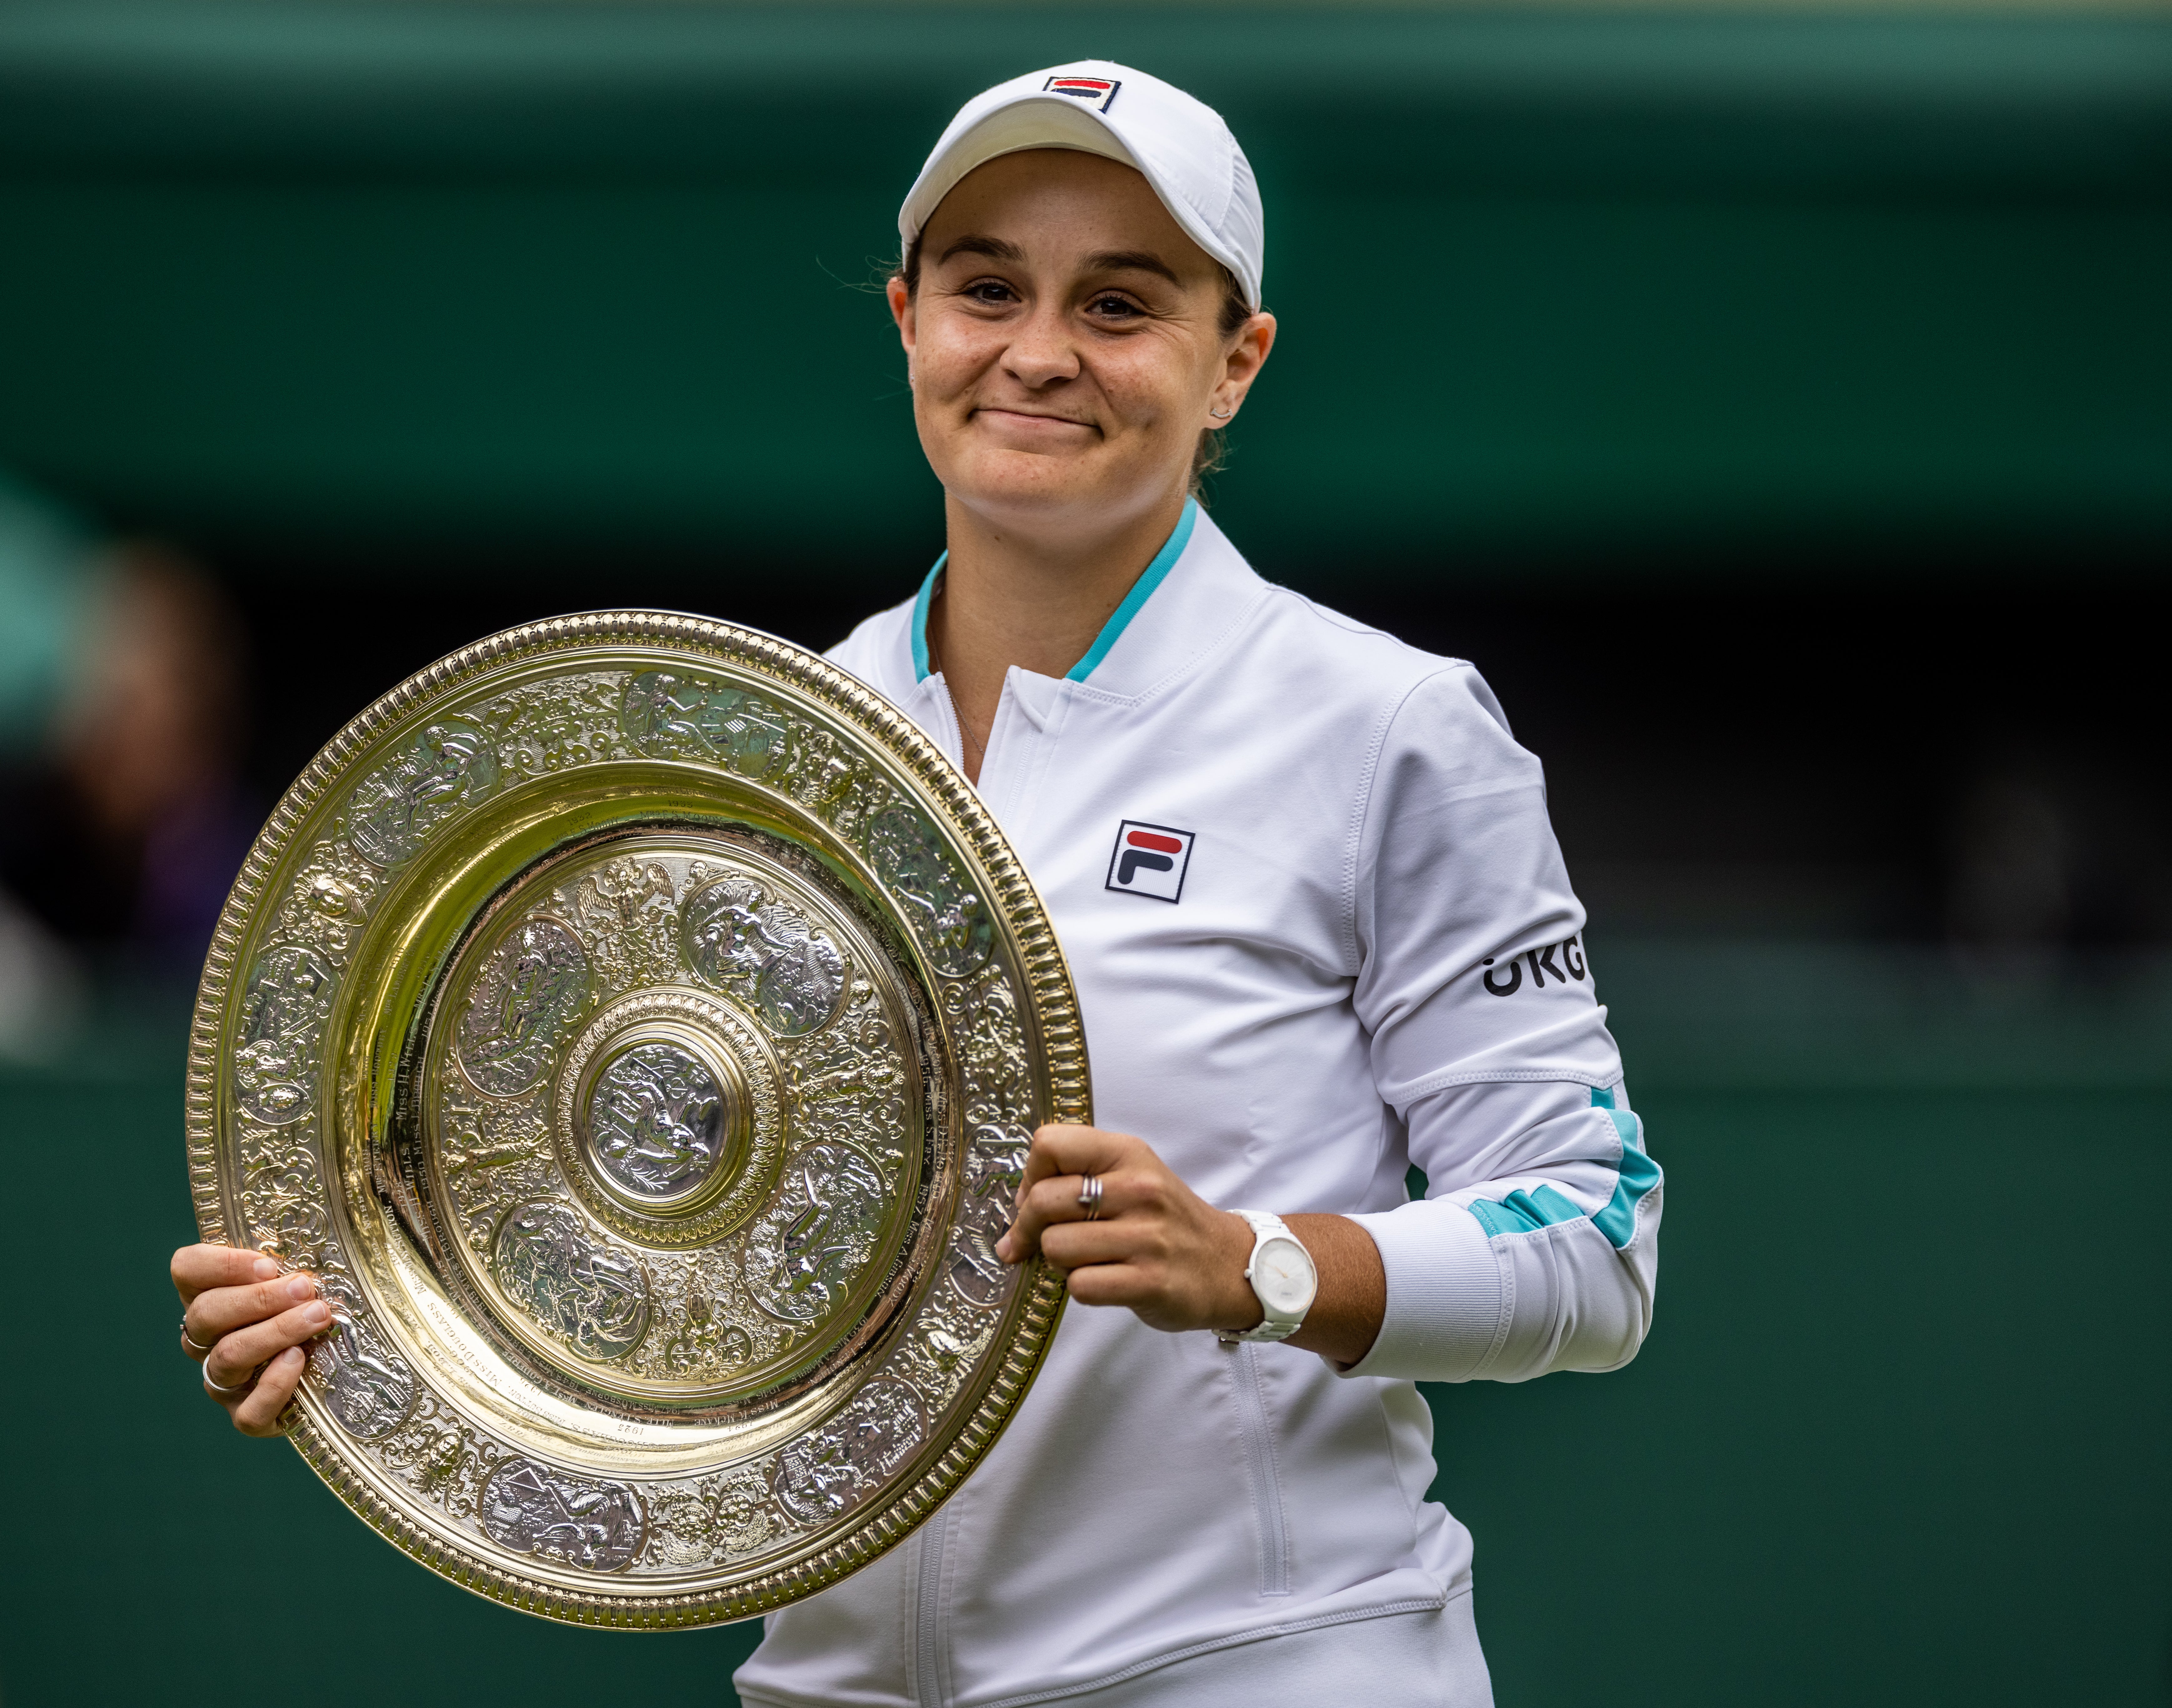 Ashleigh Barty celebrates with her trophy after winning the ladies’ singles final match against Karolina Pliskova at Wimbledon in 2021 (Steven Paston/PA)